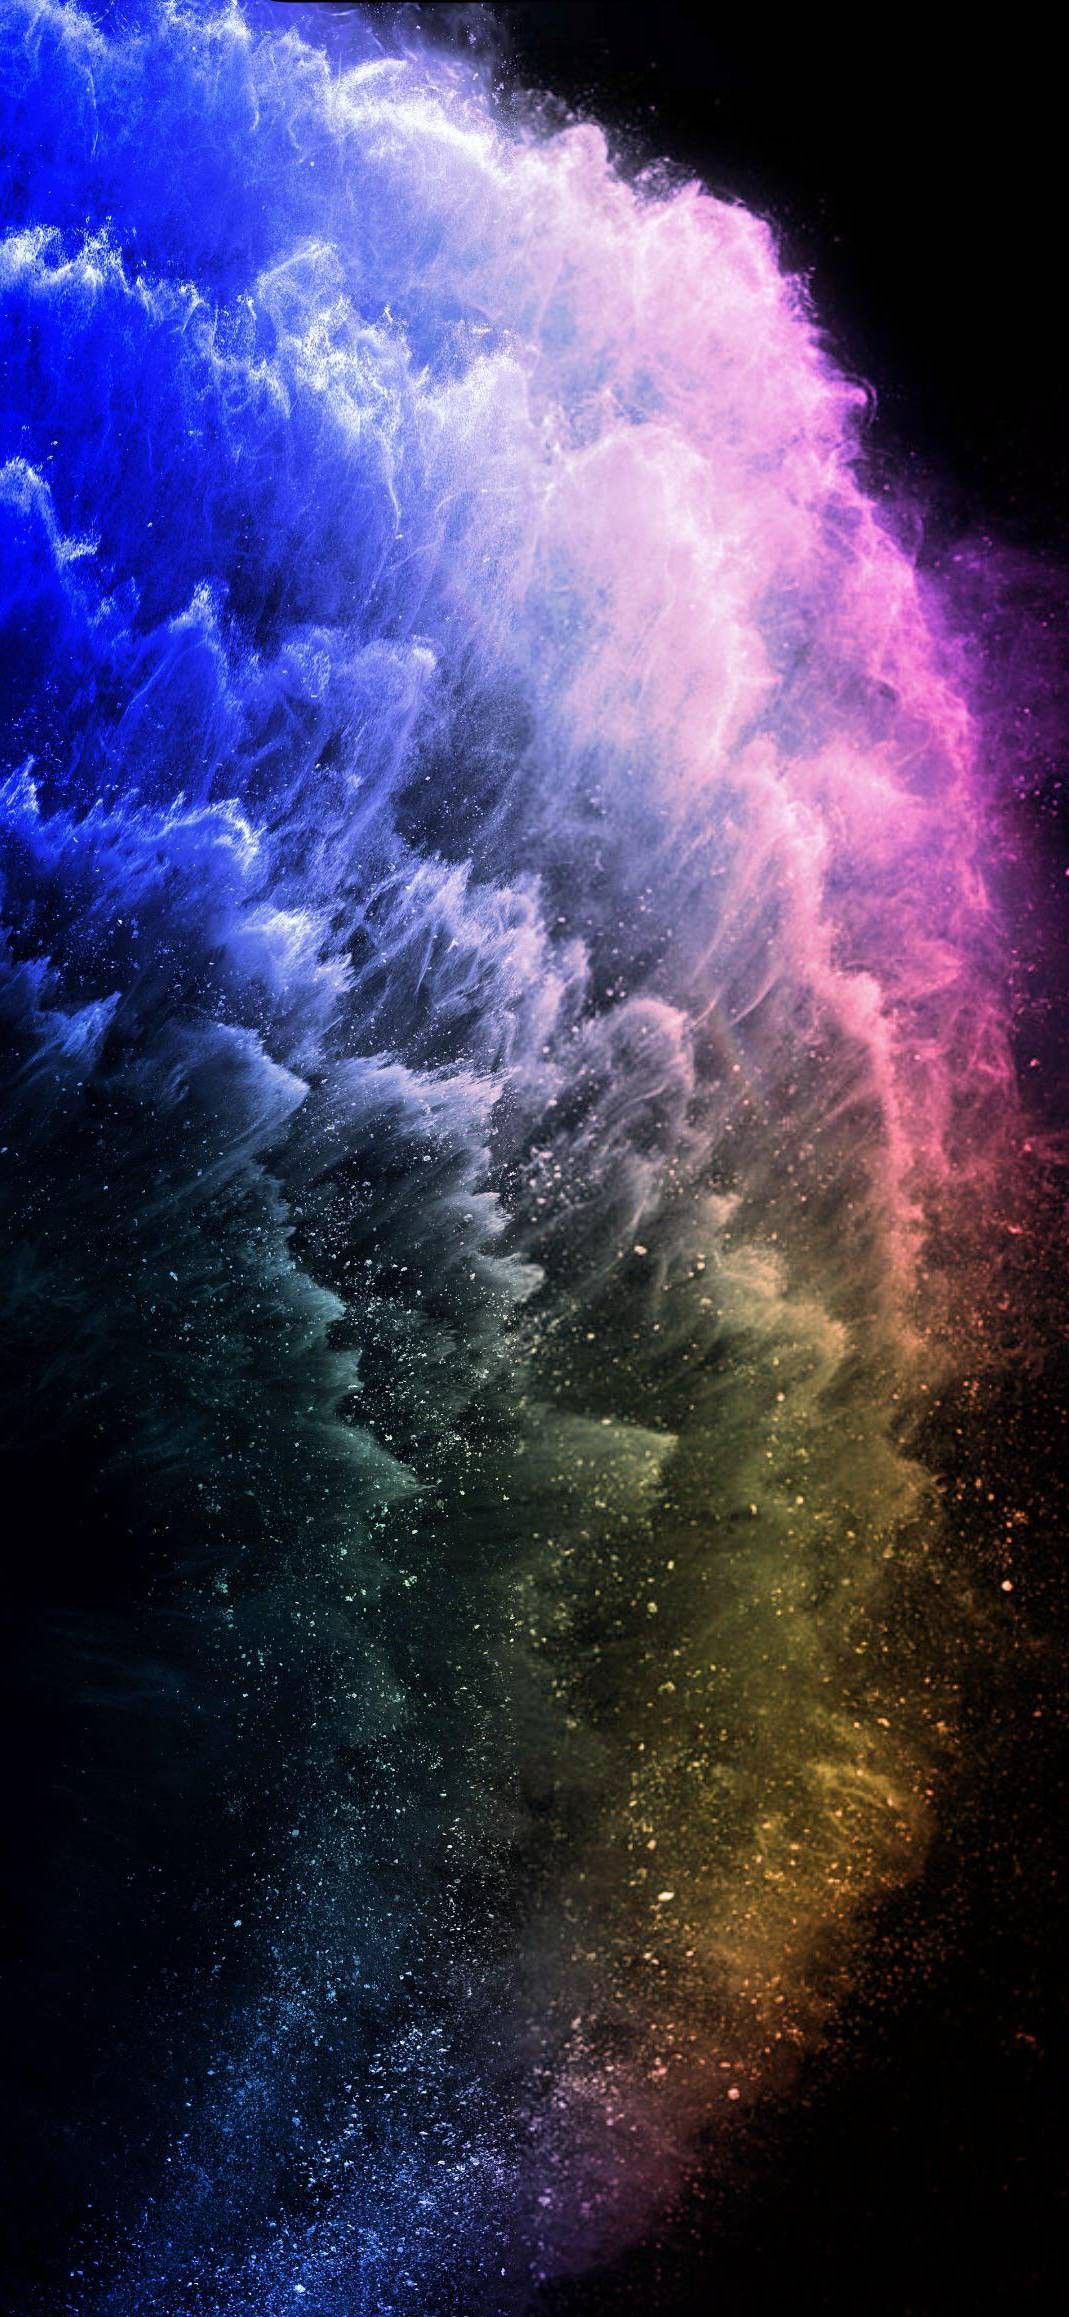 4K Quality Iphone Wallpapers